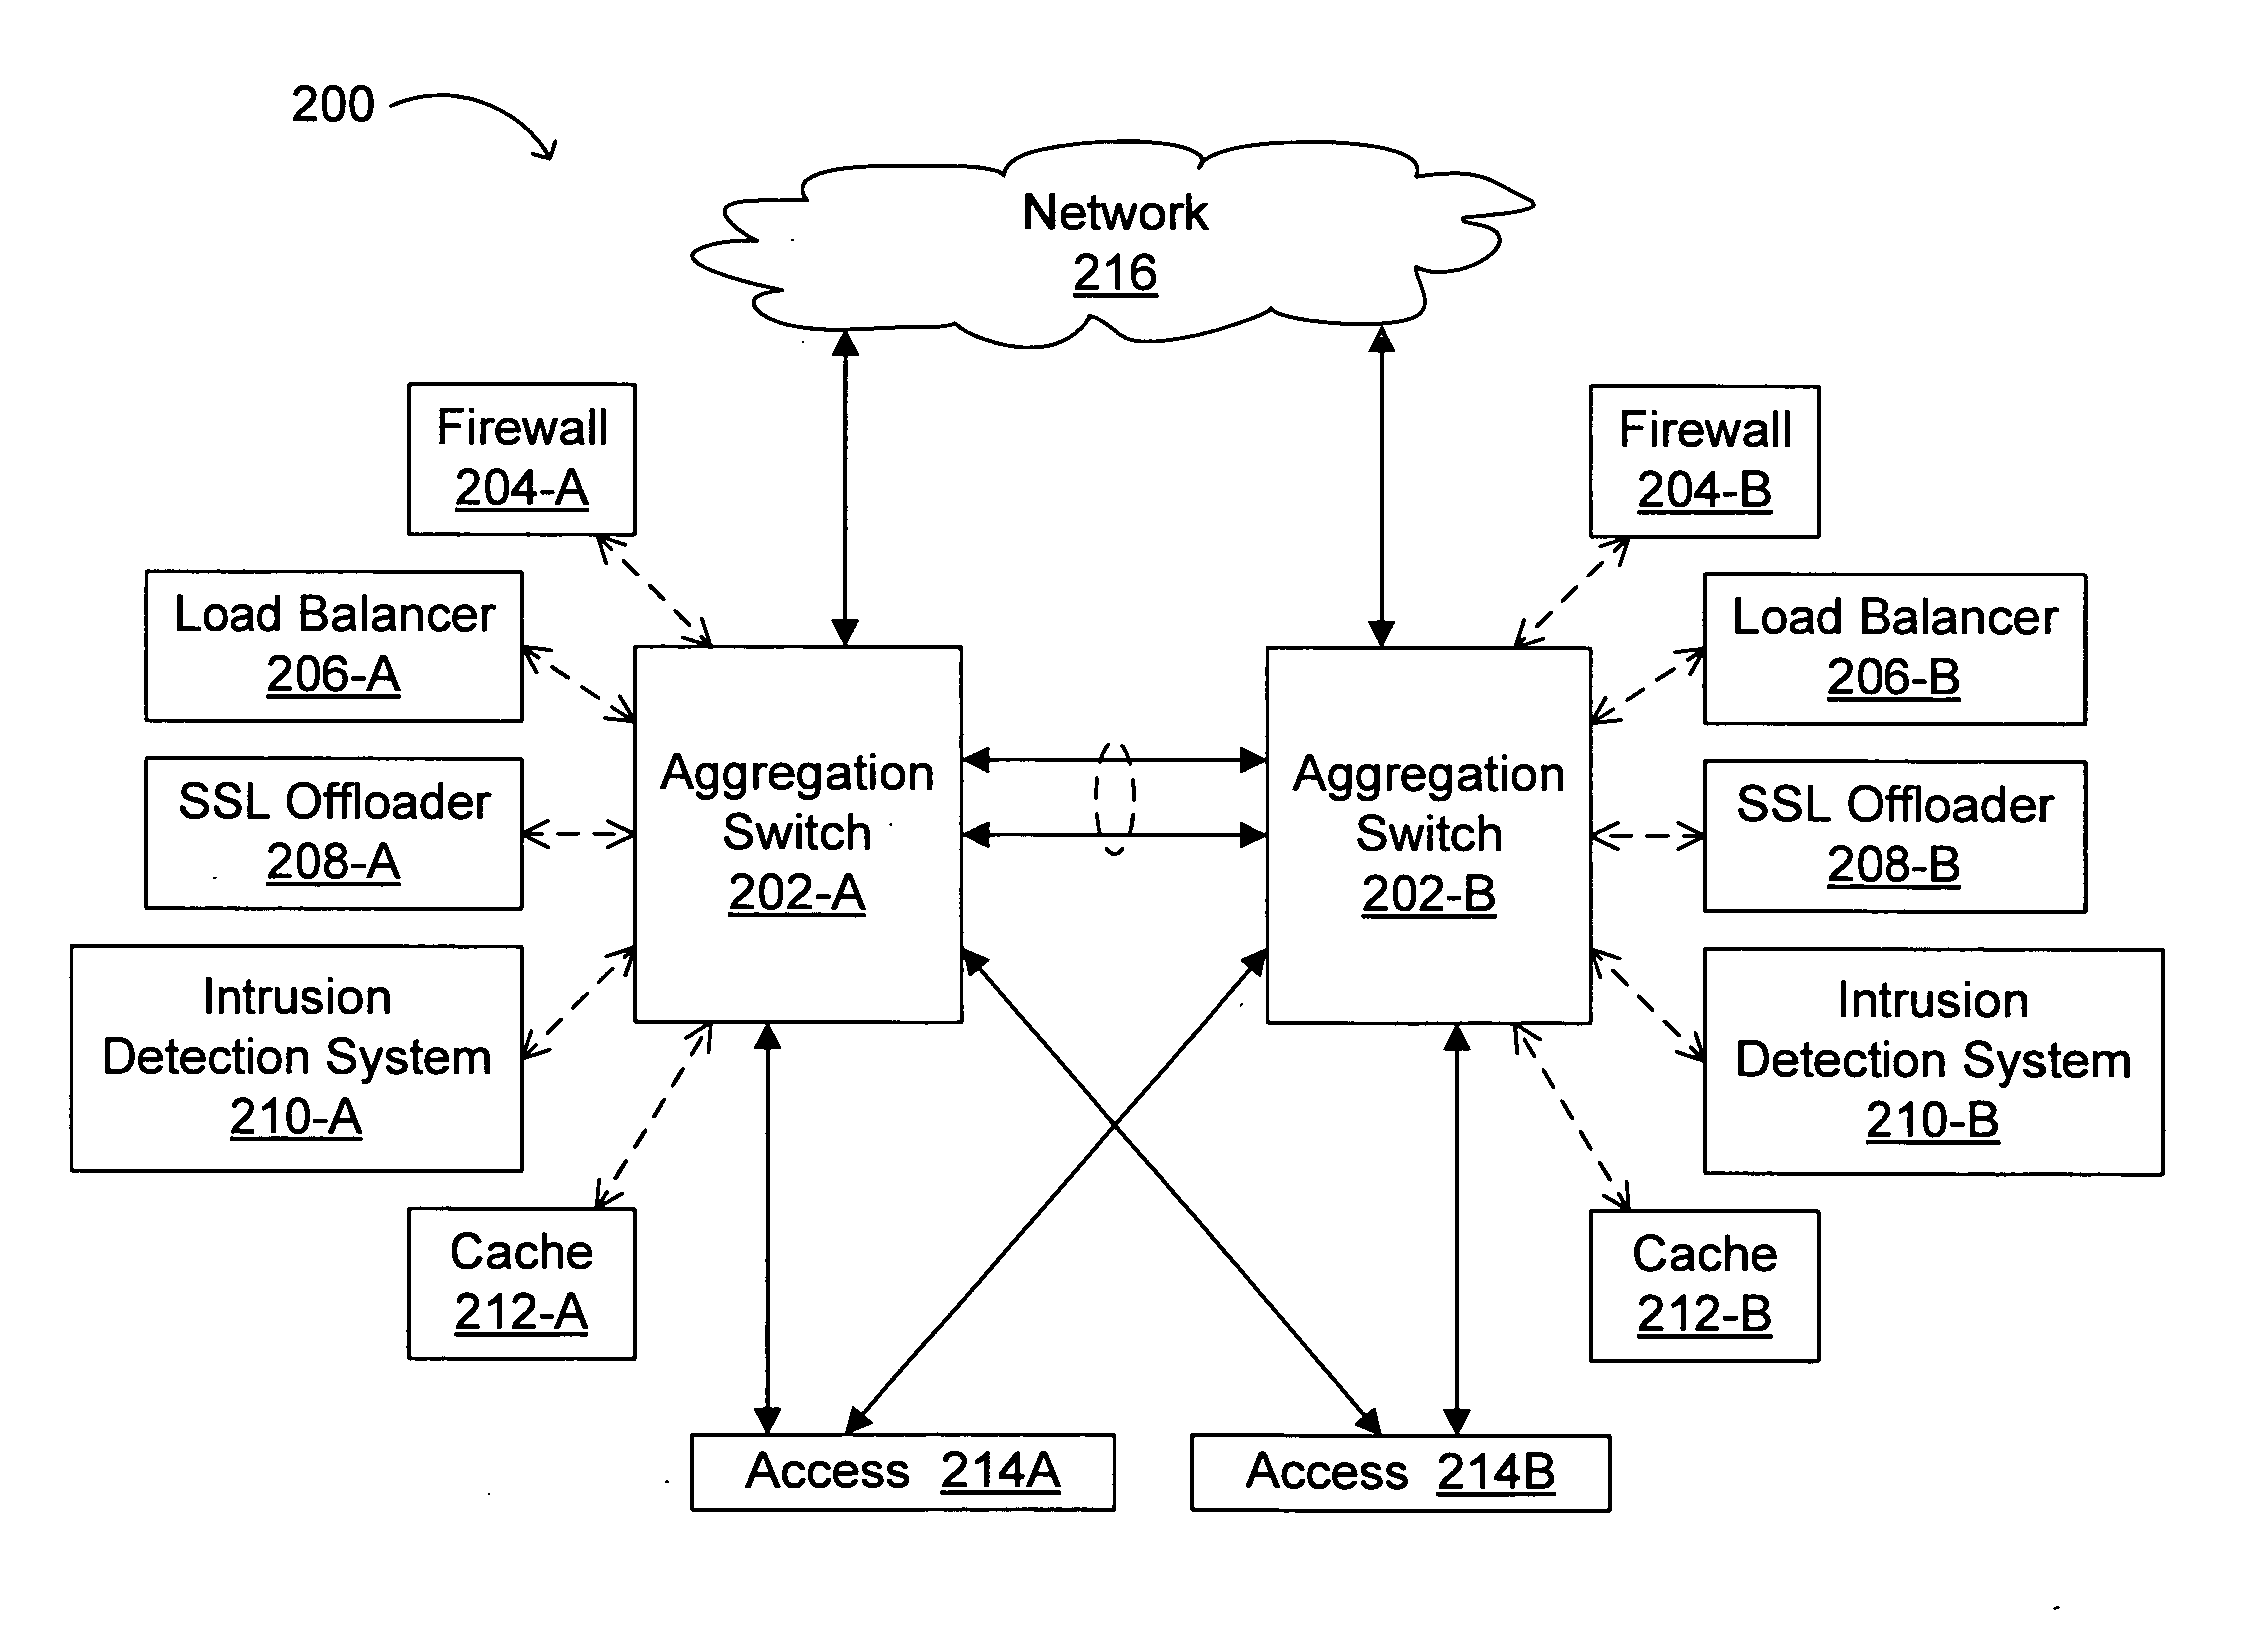 Architecture and method for accessing services in a data center